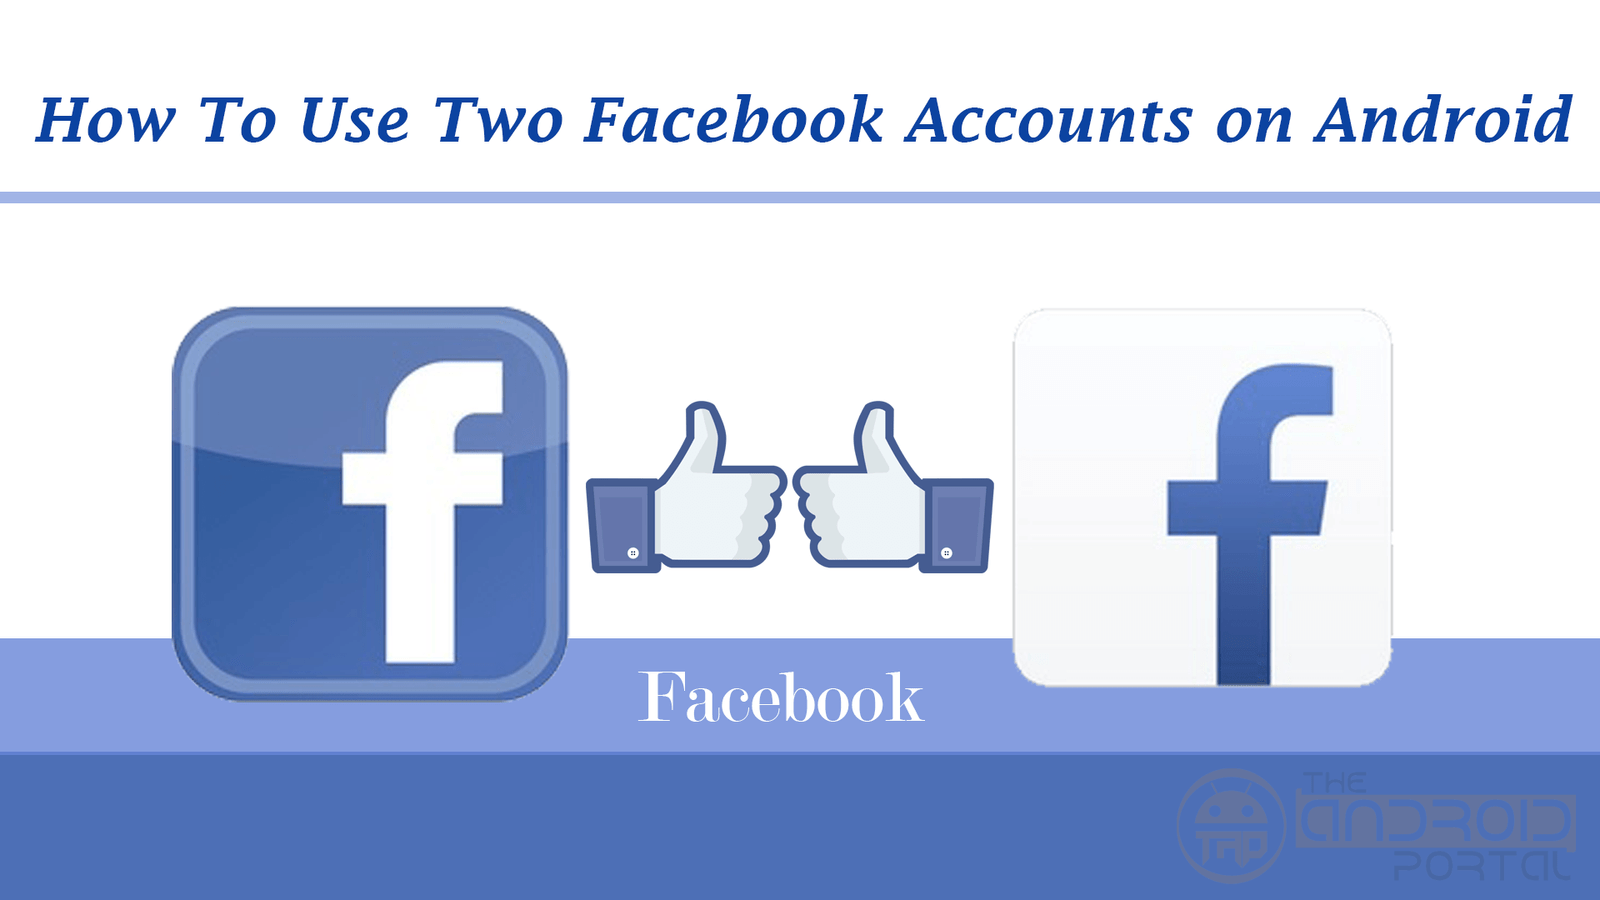 How To Use Two Facebook Accounts on Android